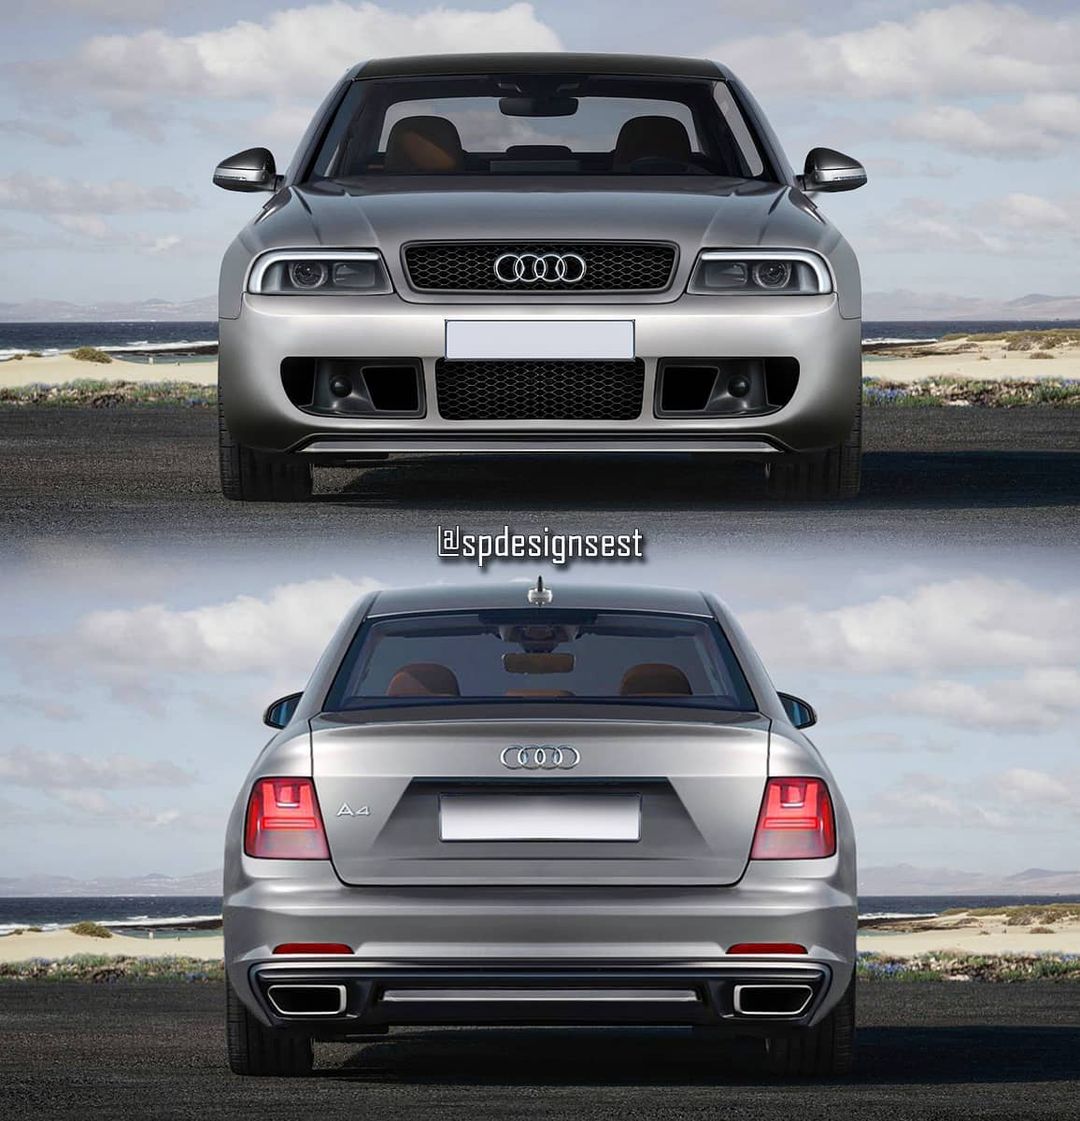 Audi A4 B5 tuning - this is what the classic should look like!